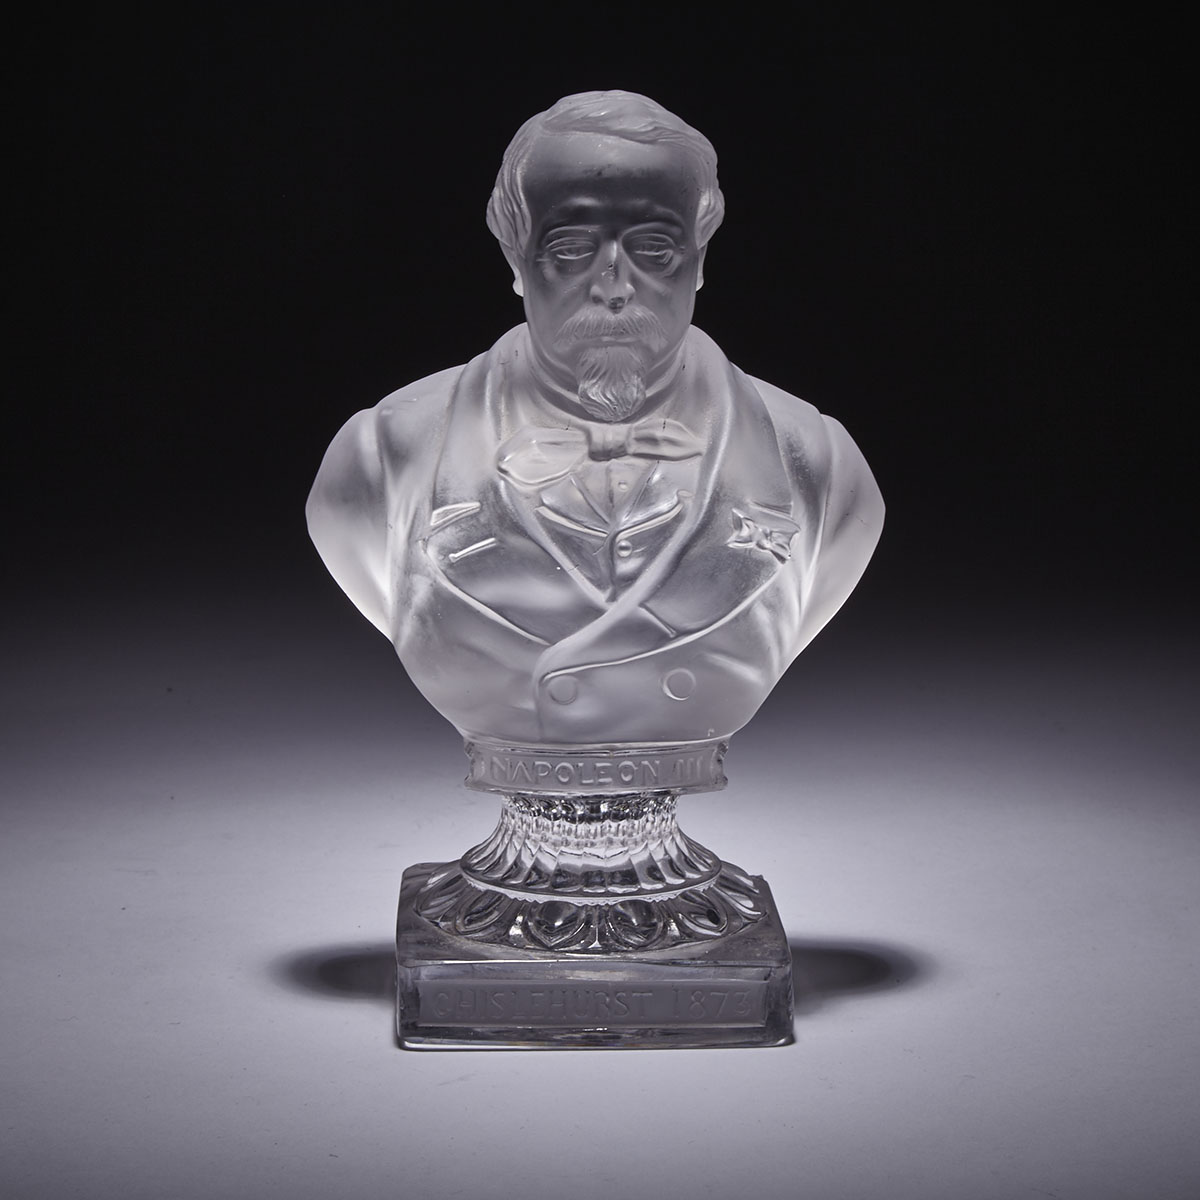 St. Louis Moulded and Frosted Glass Bust of Napoleon III, late 19th century